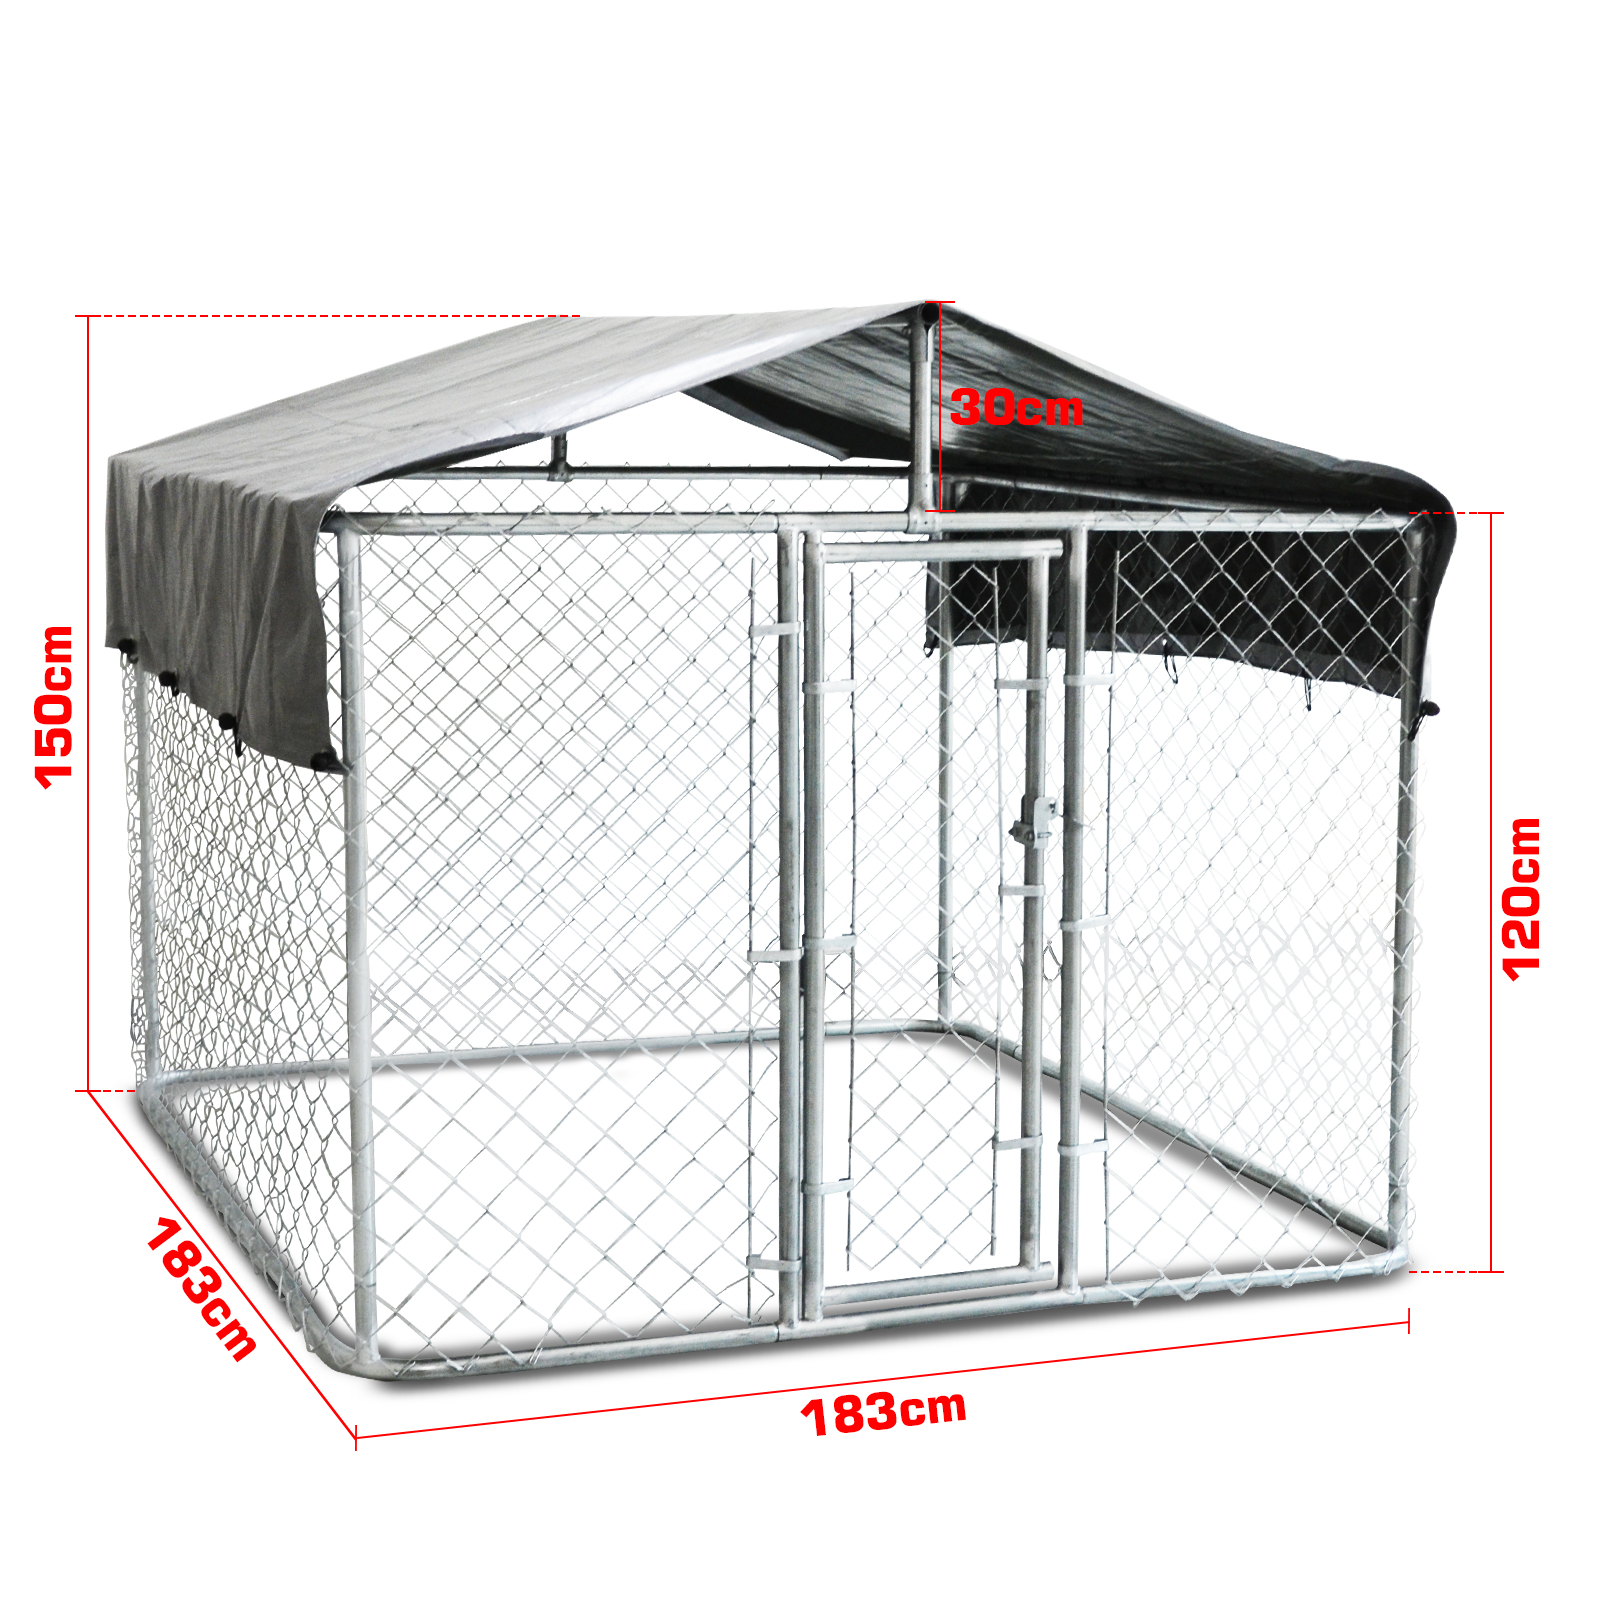 Pet Dog Enclosure Playpen Fence Puppy Run Kennel Exercise Cage Chain Play Pen A4